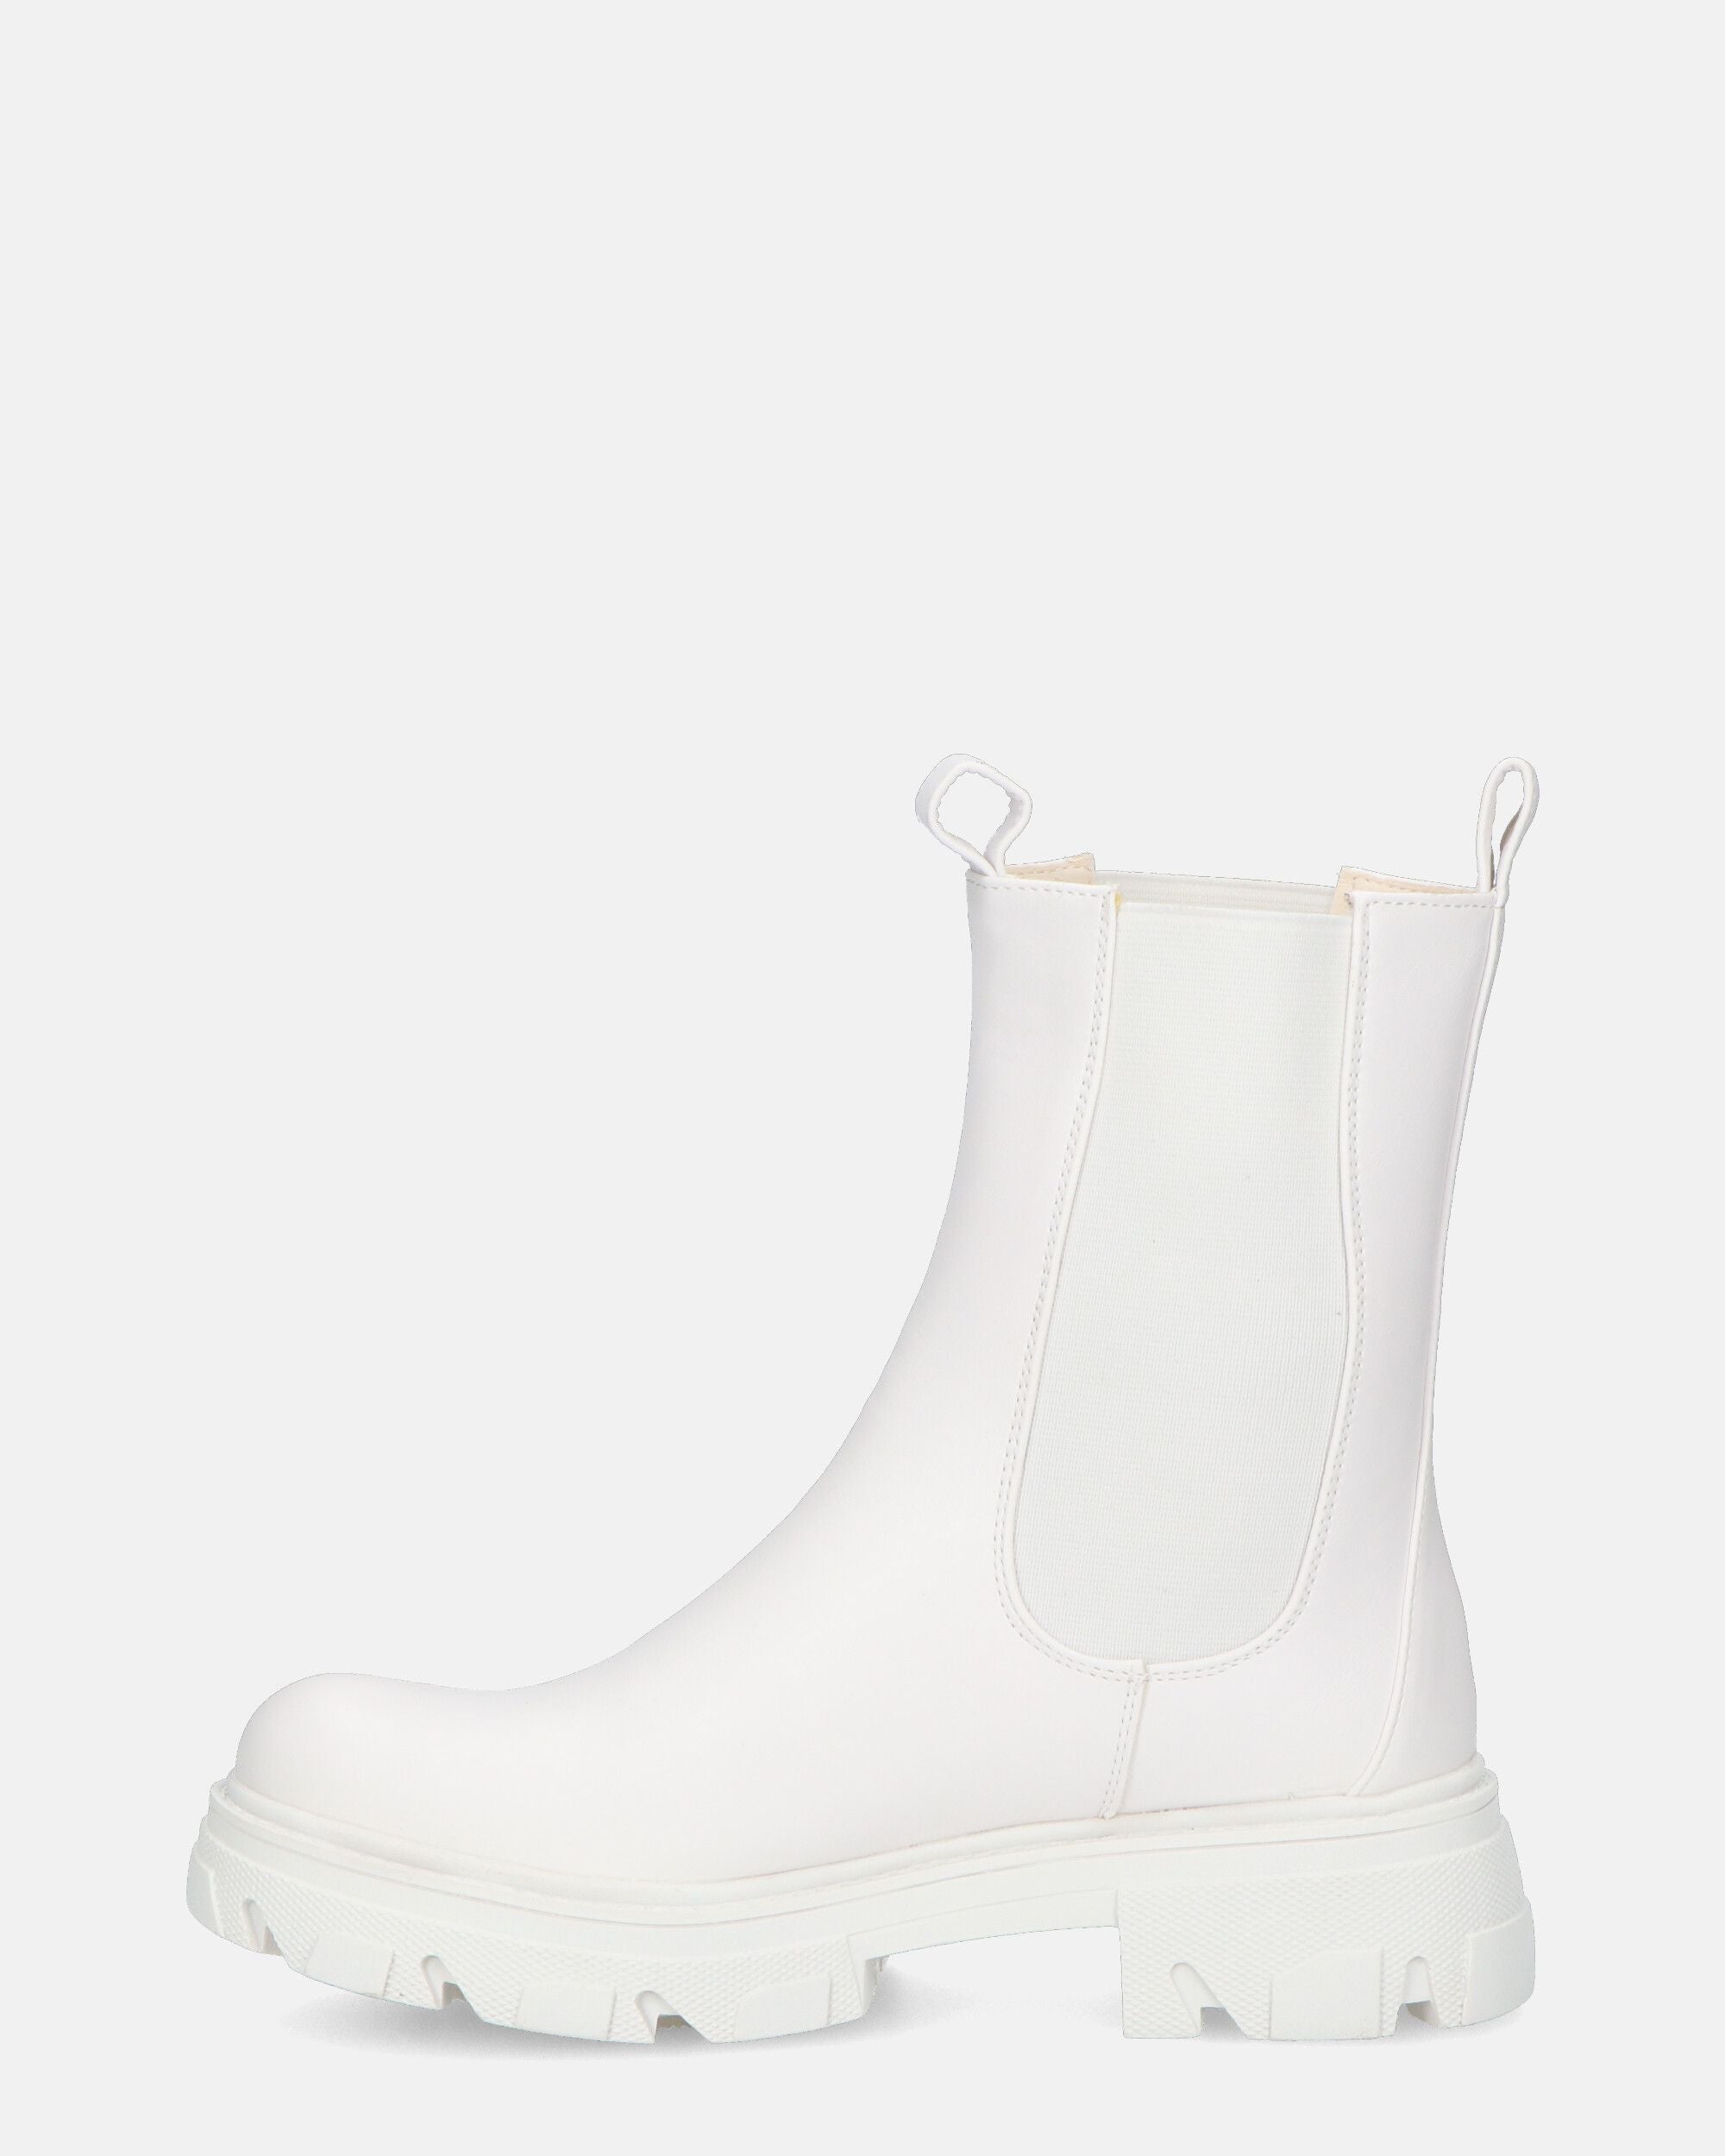 IGEA - white boots with elastic band